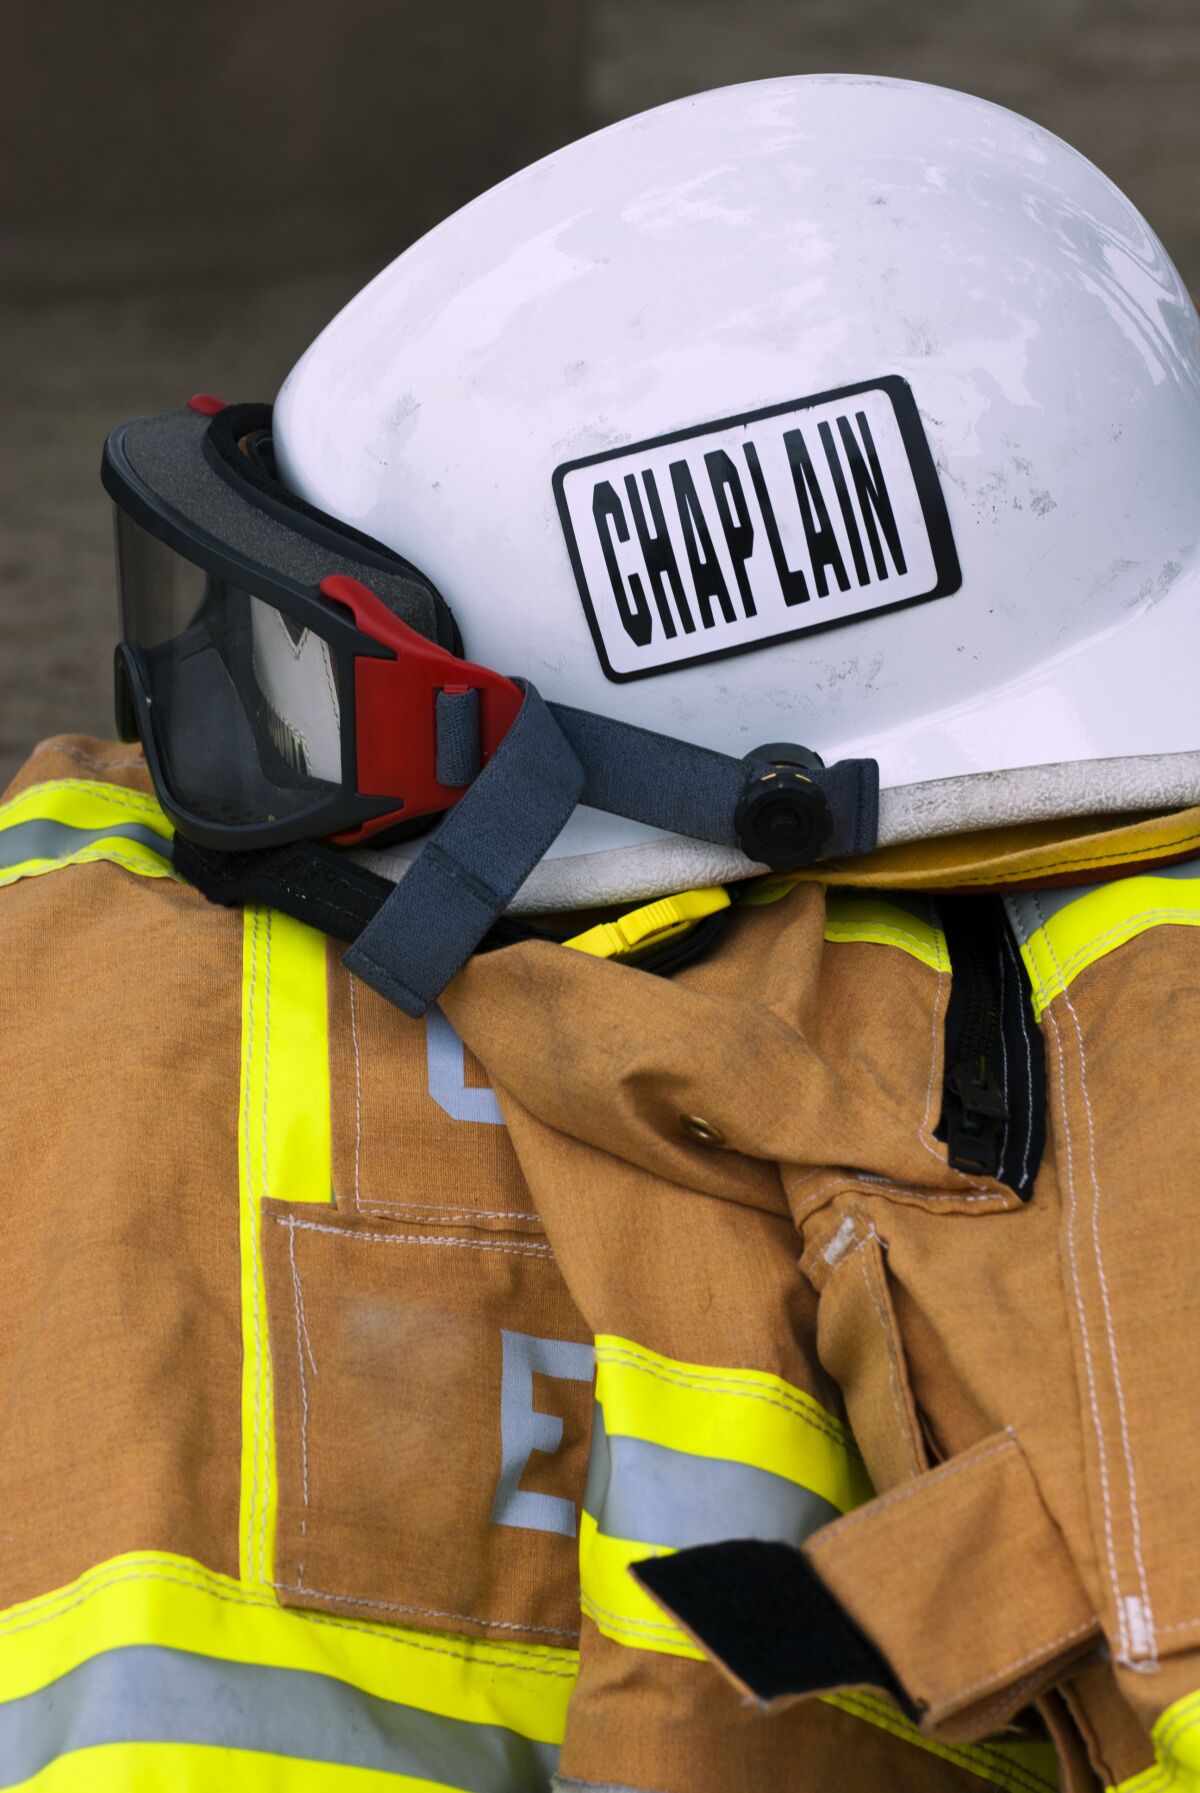 Chaplain's helmet and turnout gear from fire department